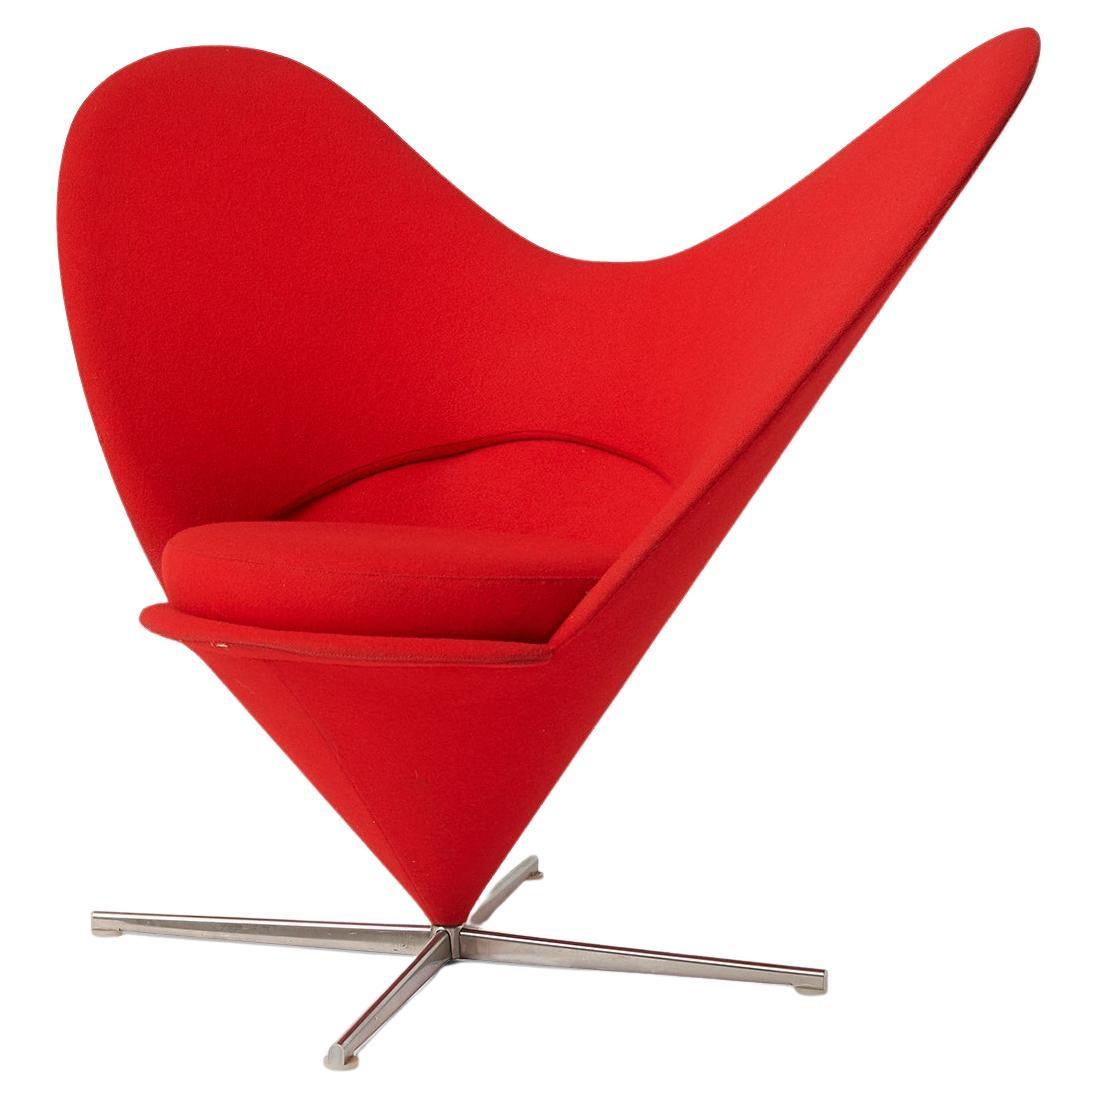 Red Heart Cone Chair by Verner Panton for Vitra